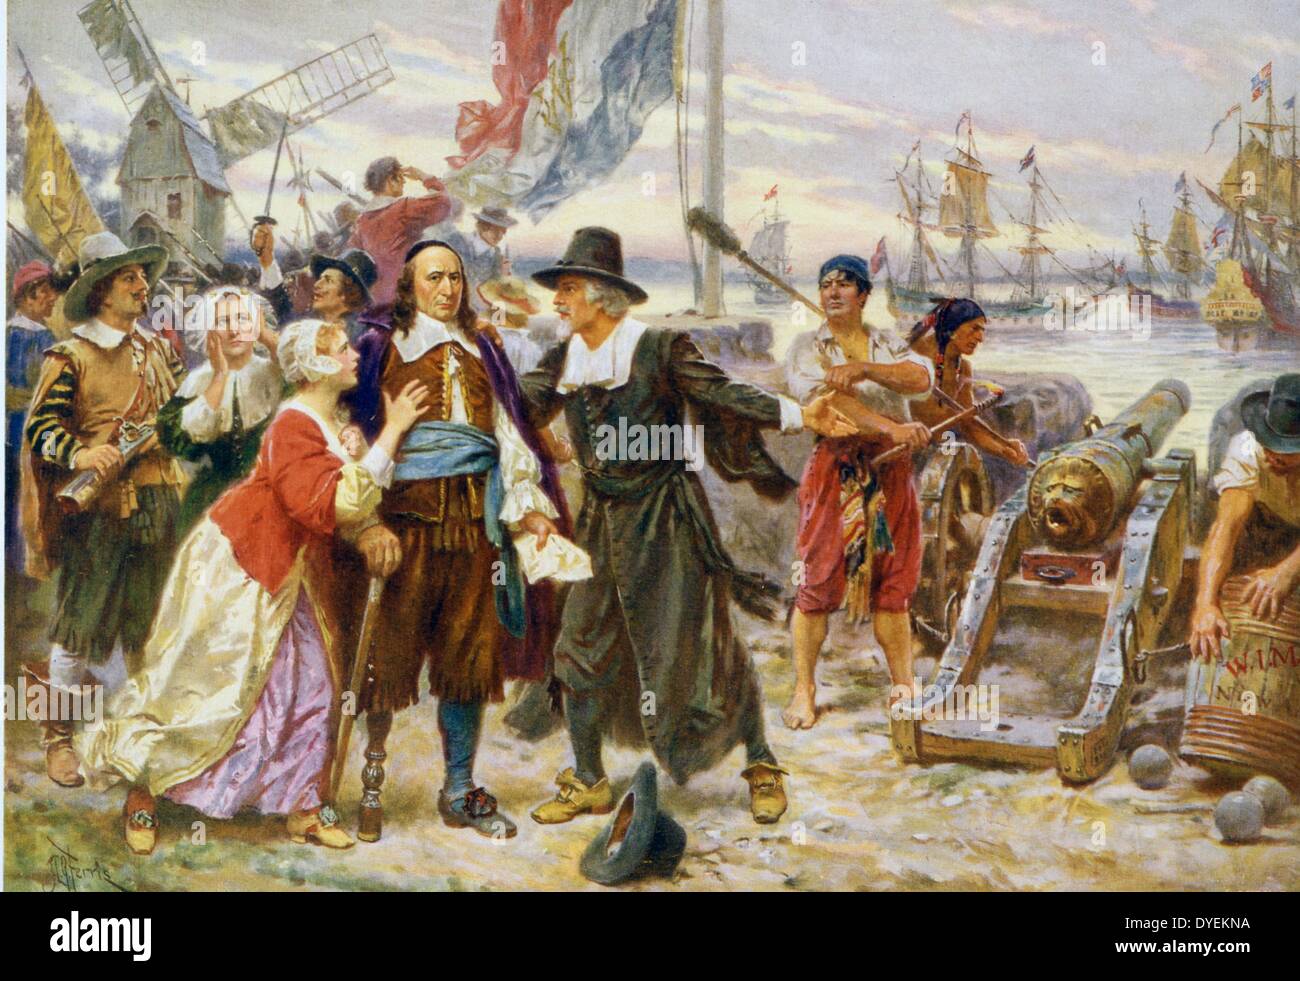 The fall of New Amsterdam by Jean Leon Gerome Ferris, 1863-1930, artist. Published 1932. Print shows Peter Stuyvesant, in 1664, standing on shore among residents of New Amsterdam who are pleading with him not to open fire on the British who have arrived in warships waiting in the harbour to claim the territory for England. Stock Photo